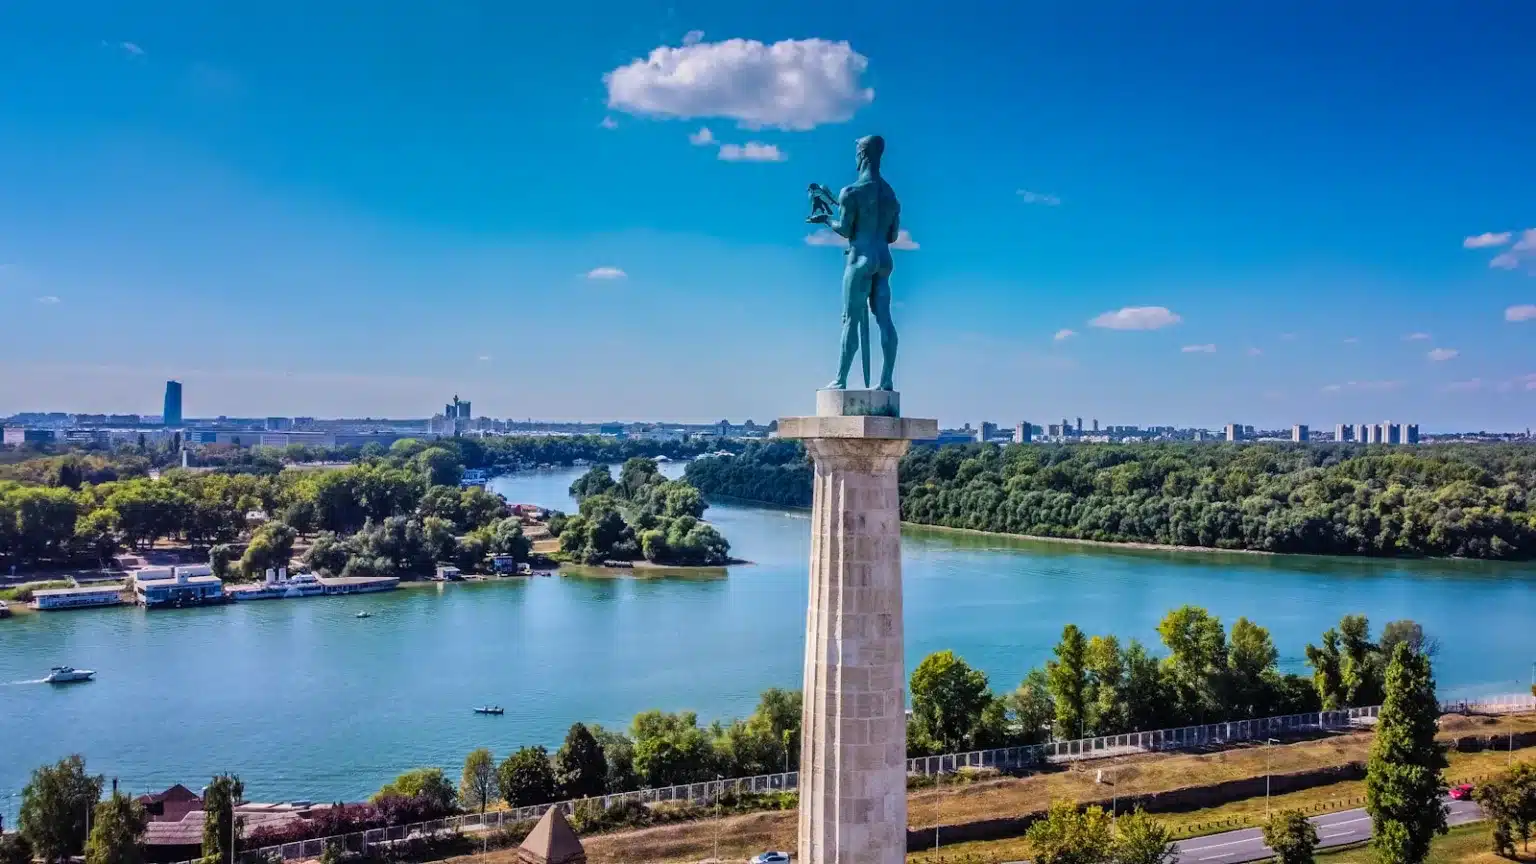 MBBS in Serbia - a statue of a man standing on top of a tower